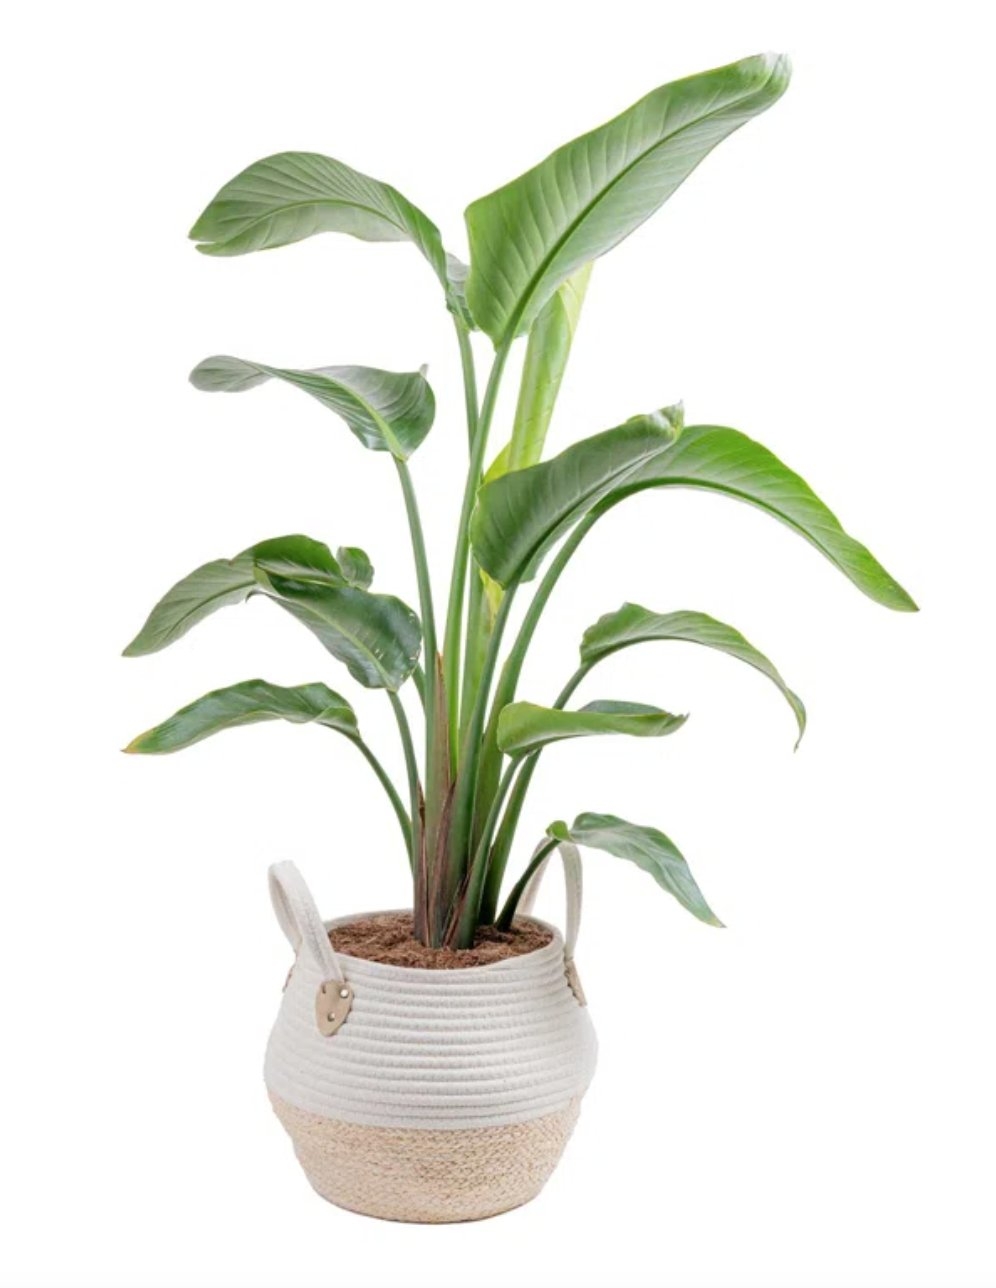 Costa Farms Live White Bird of Paradise Low Maintenance Plant in Weave Basket 10-in Pot - Image 0